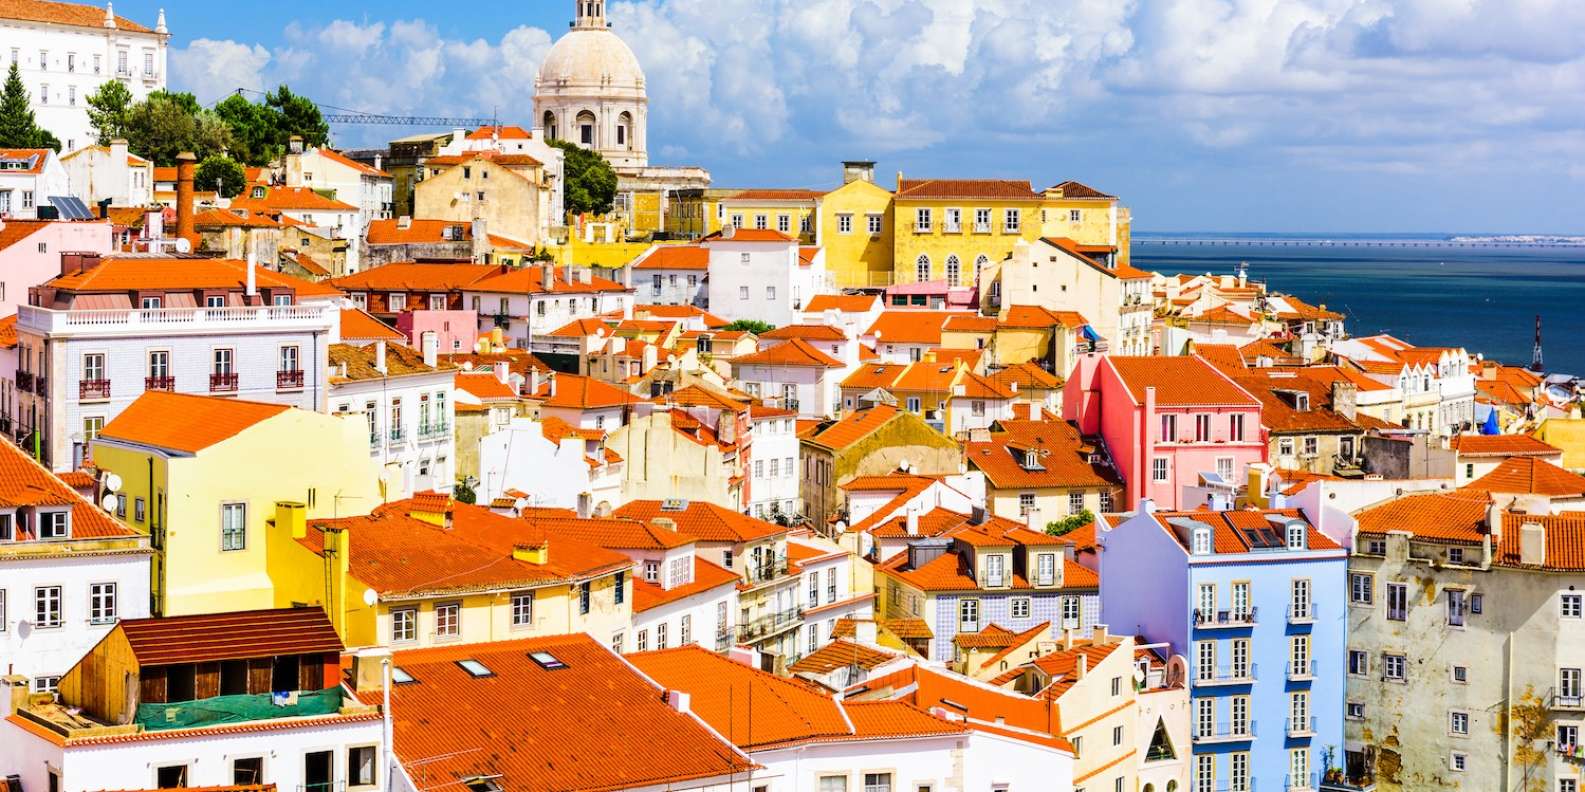 Lisbon: Alfama District Self-Guided Walking Tour | GetYourGuide